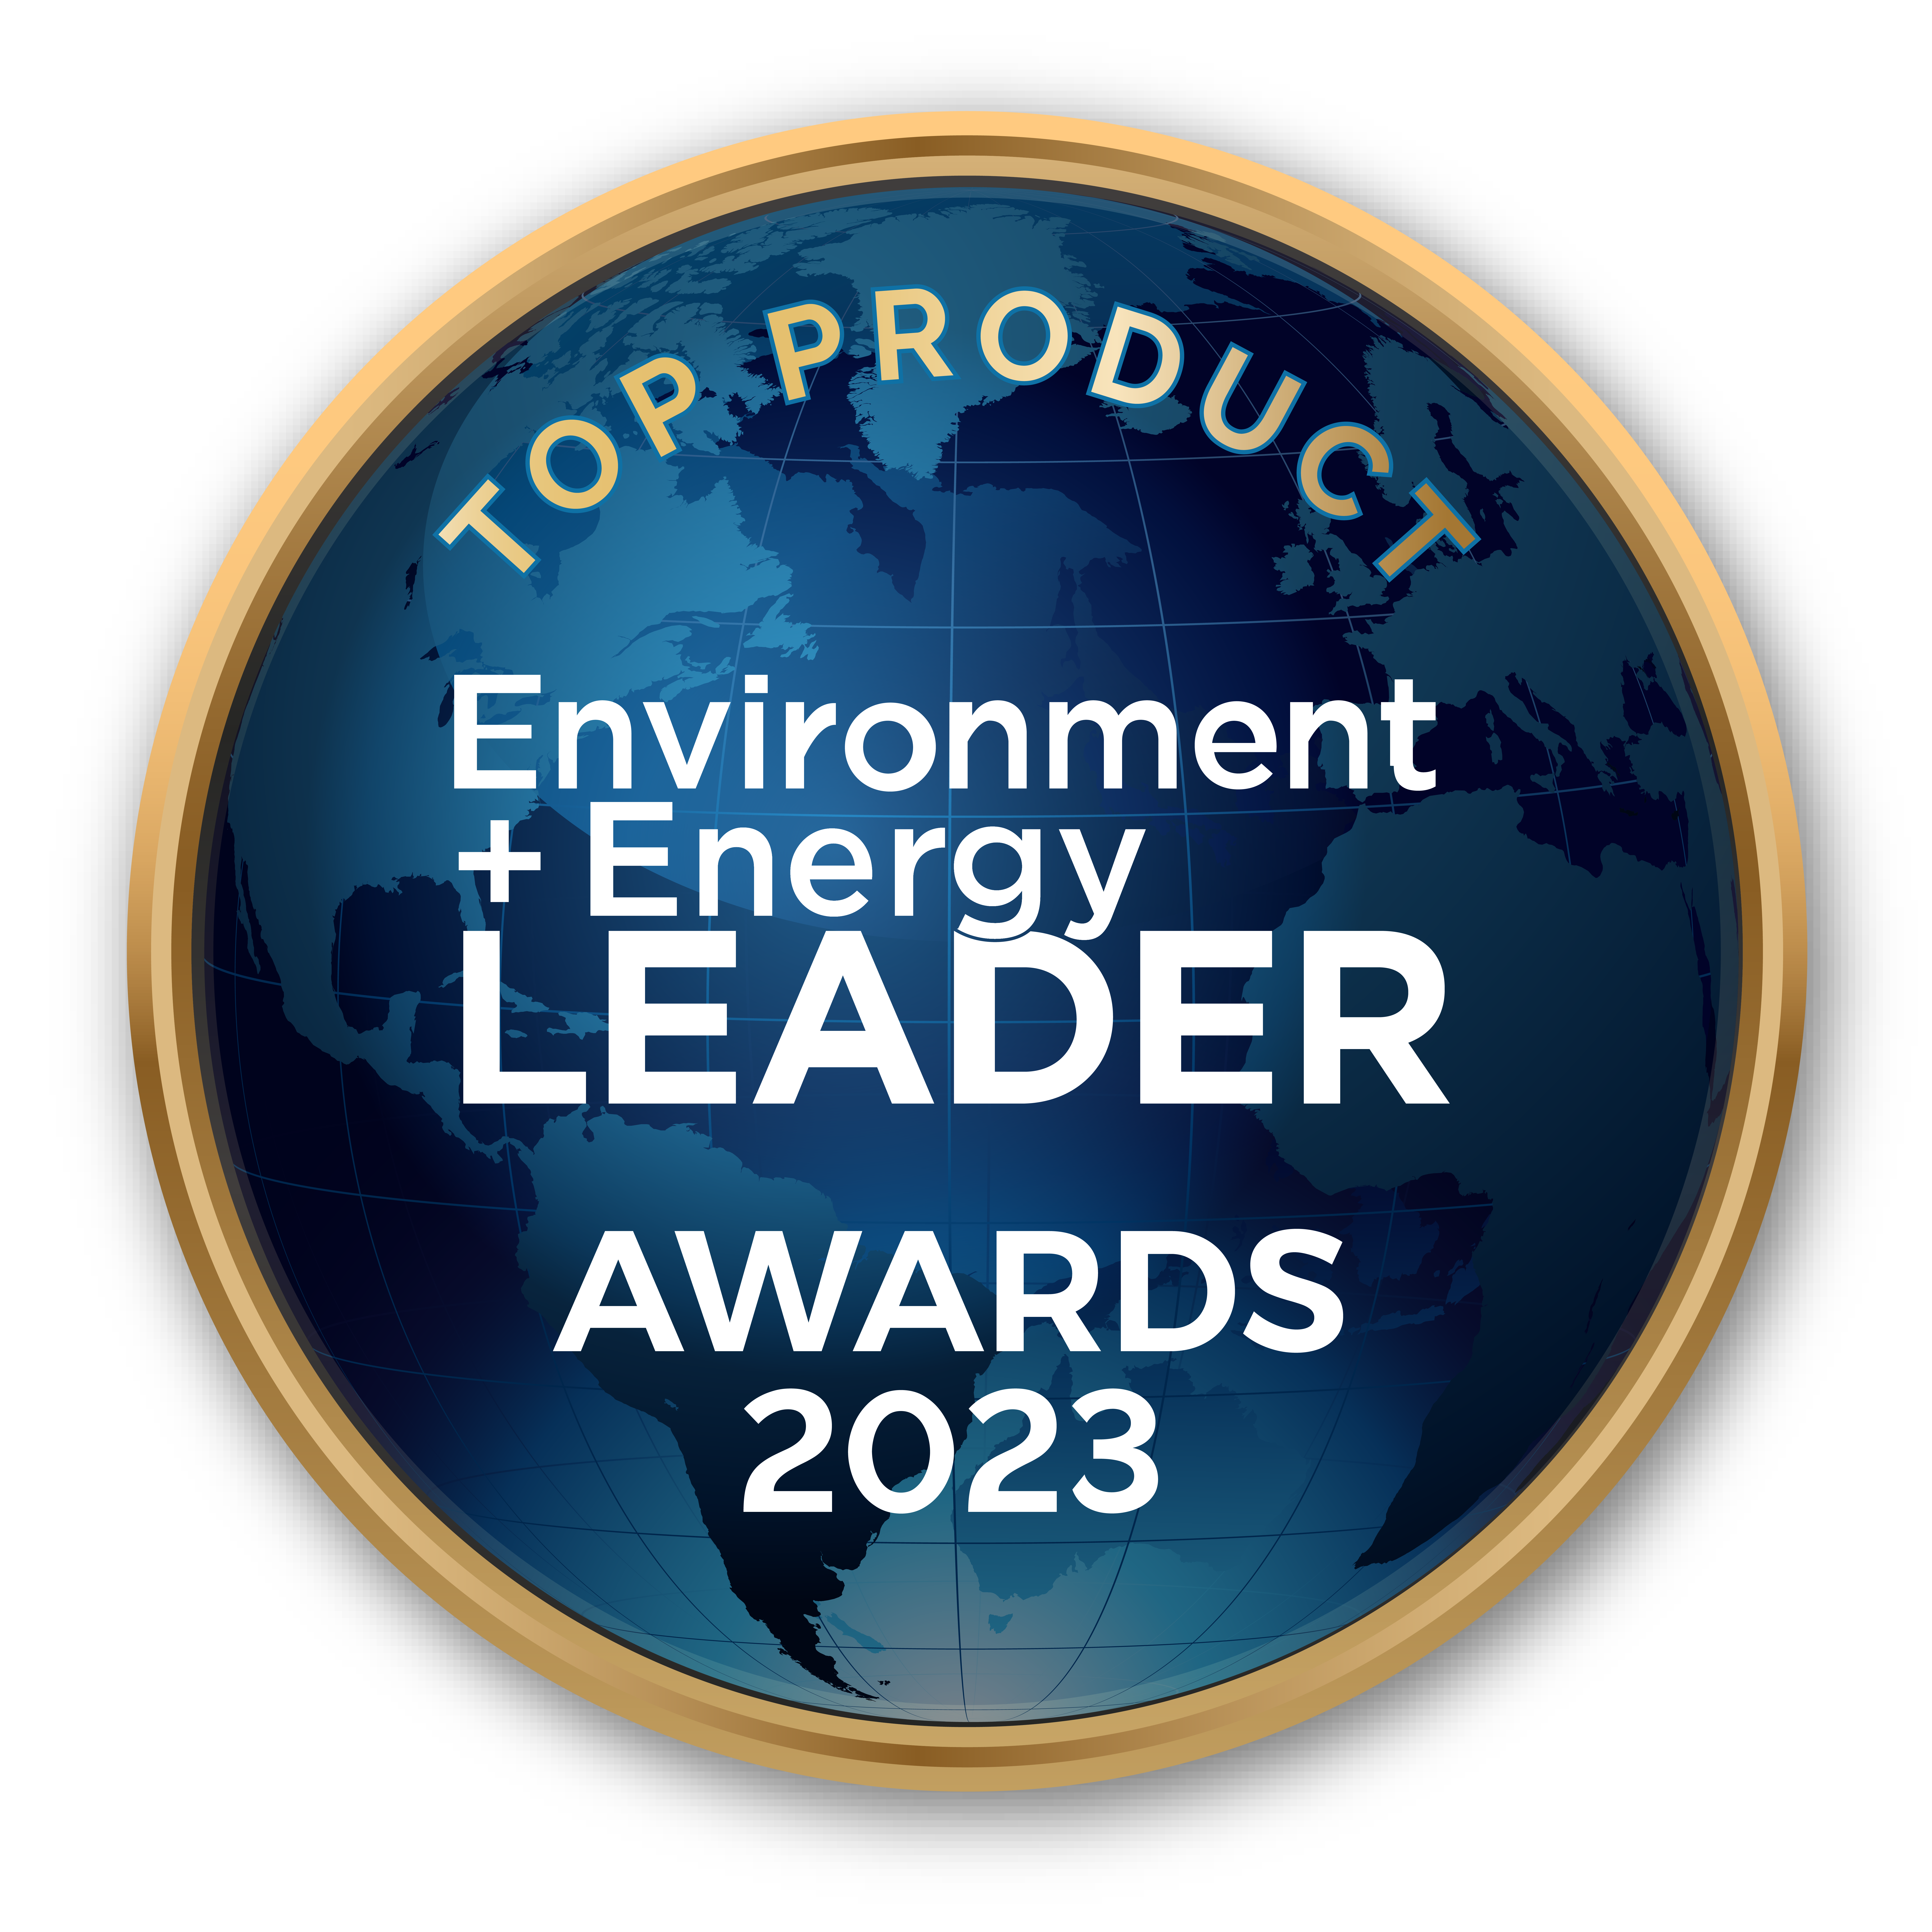 Beam Global Receives Top Product of the Year Award from Environment + Energy Leader